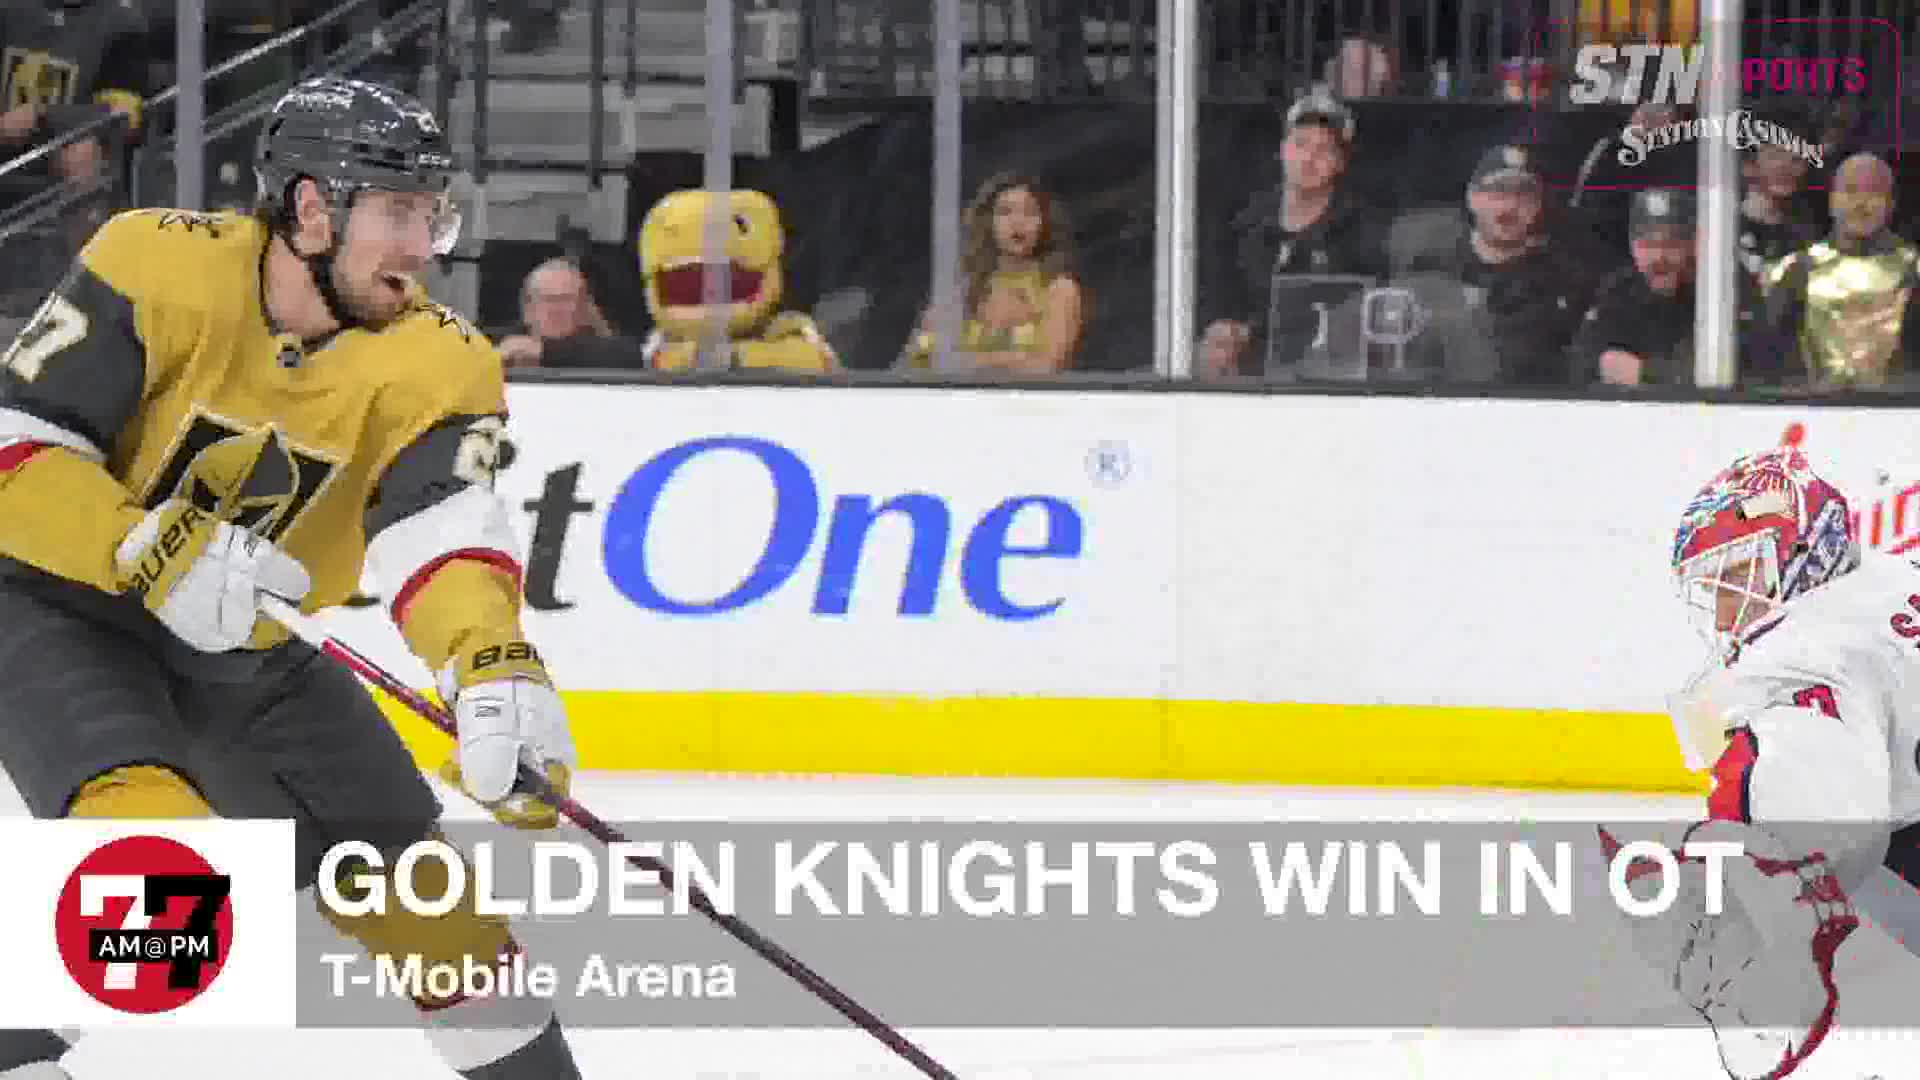 Golden Knights Win in Overtime